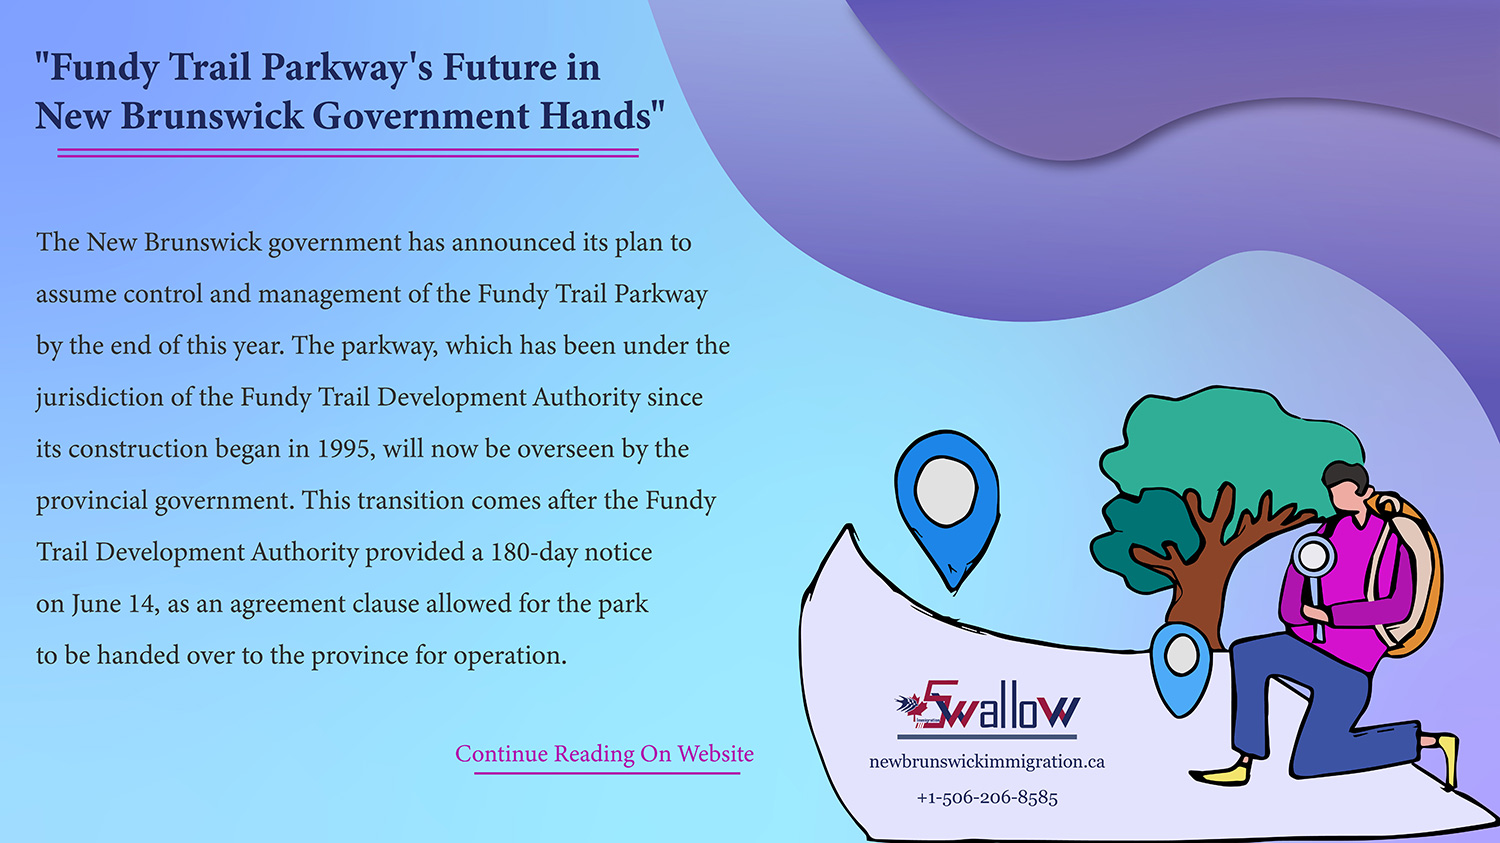 “Fundy Trail Parkway’s Future in New Brunswick Government Hands”